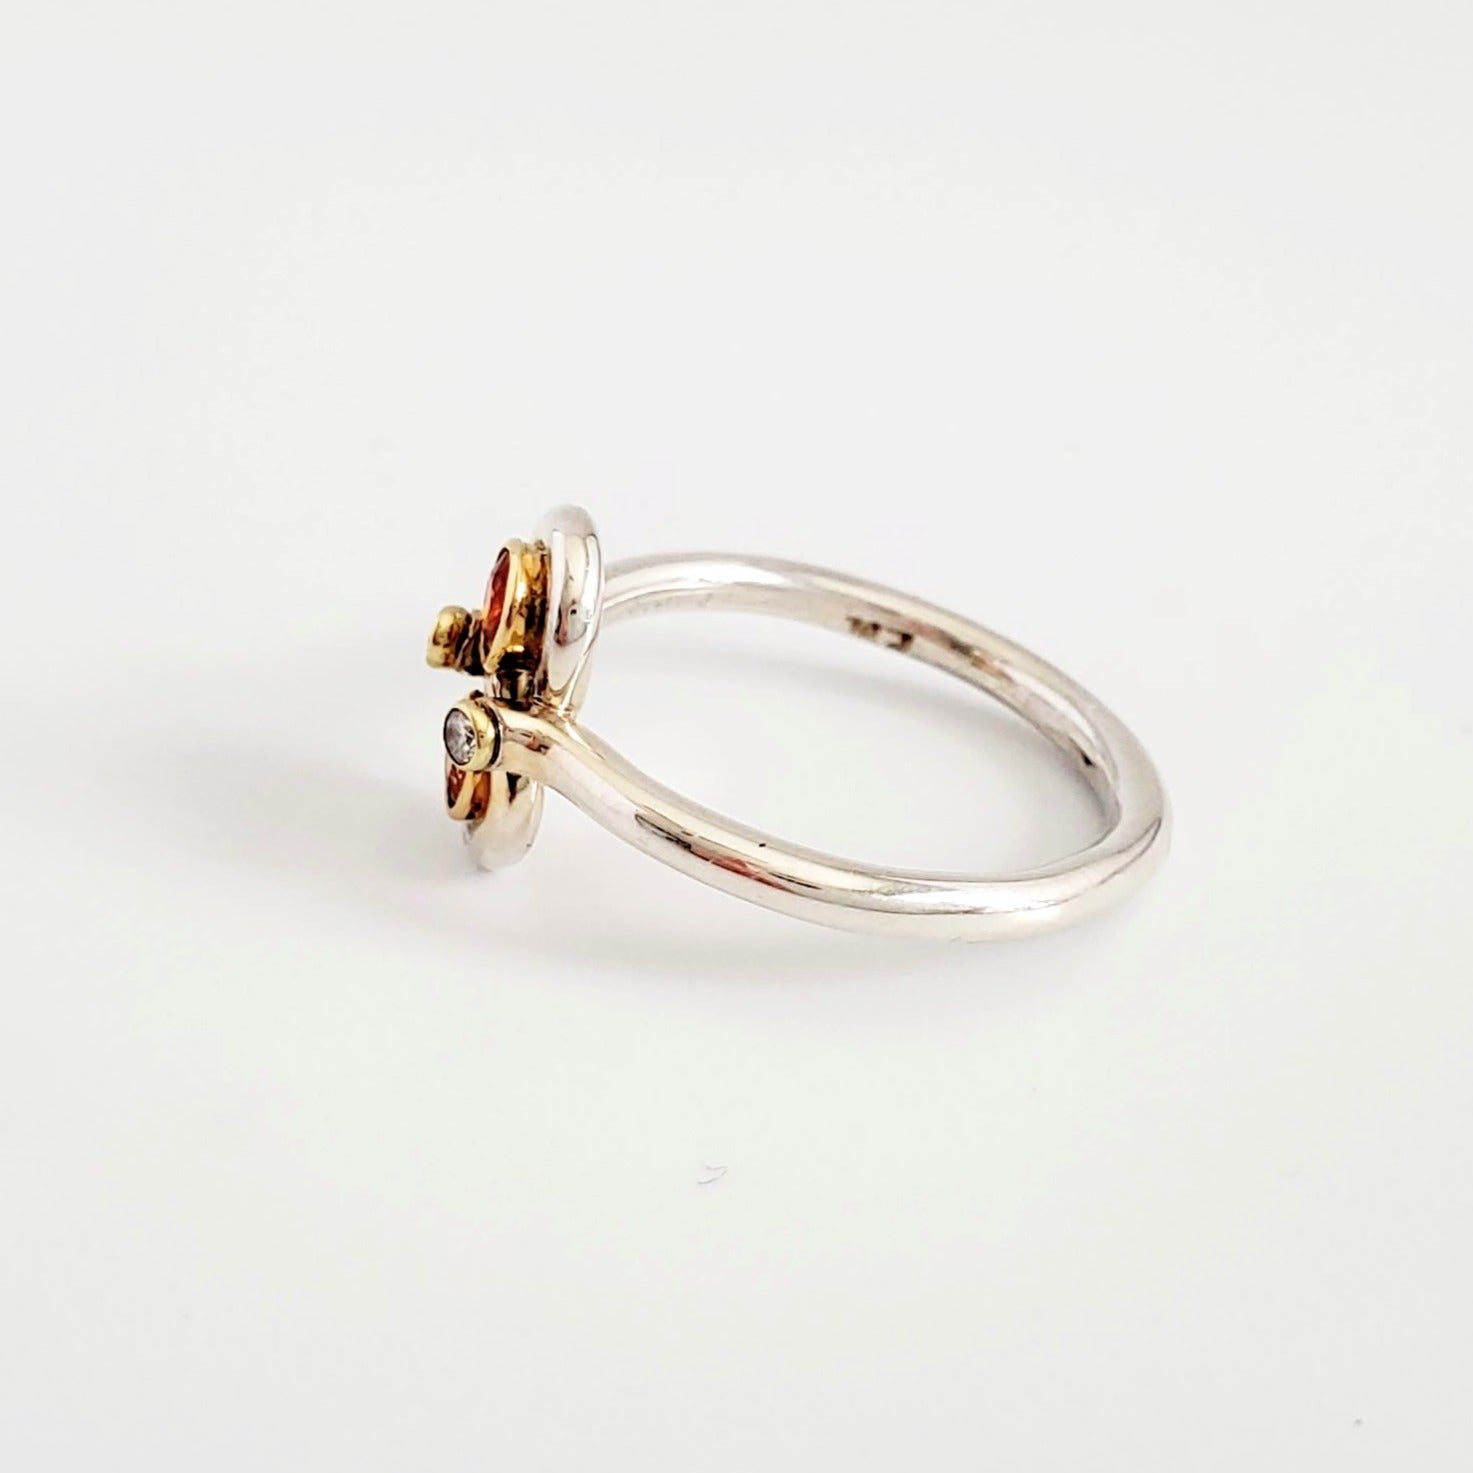 TWO-TONED ORANGE SAPPHIRES & DIAMONDS IN 18KT & STERLING SILVER